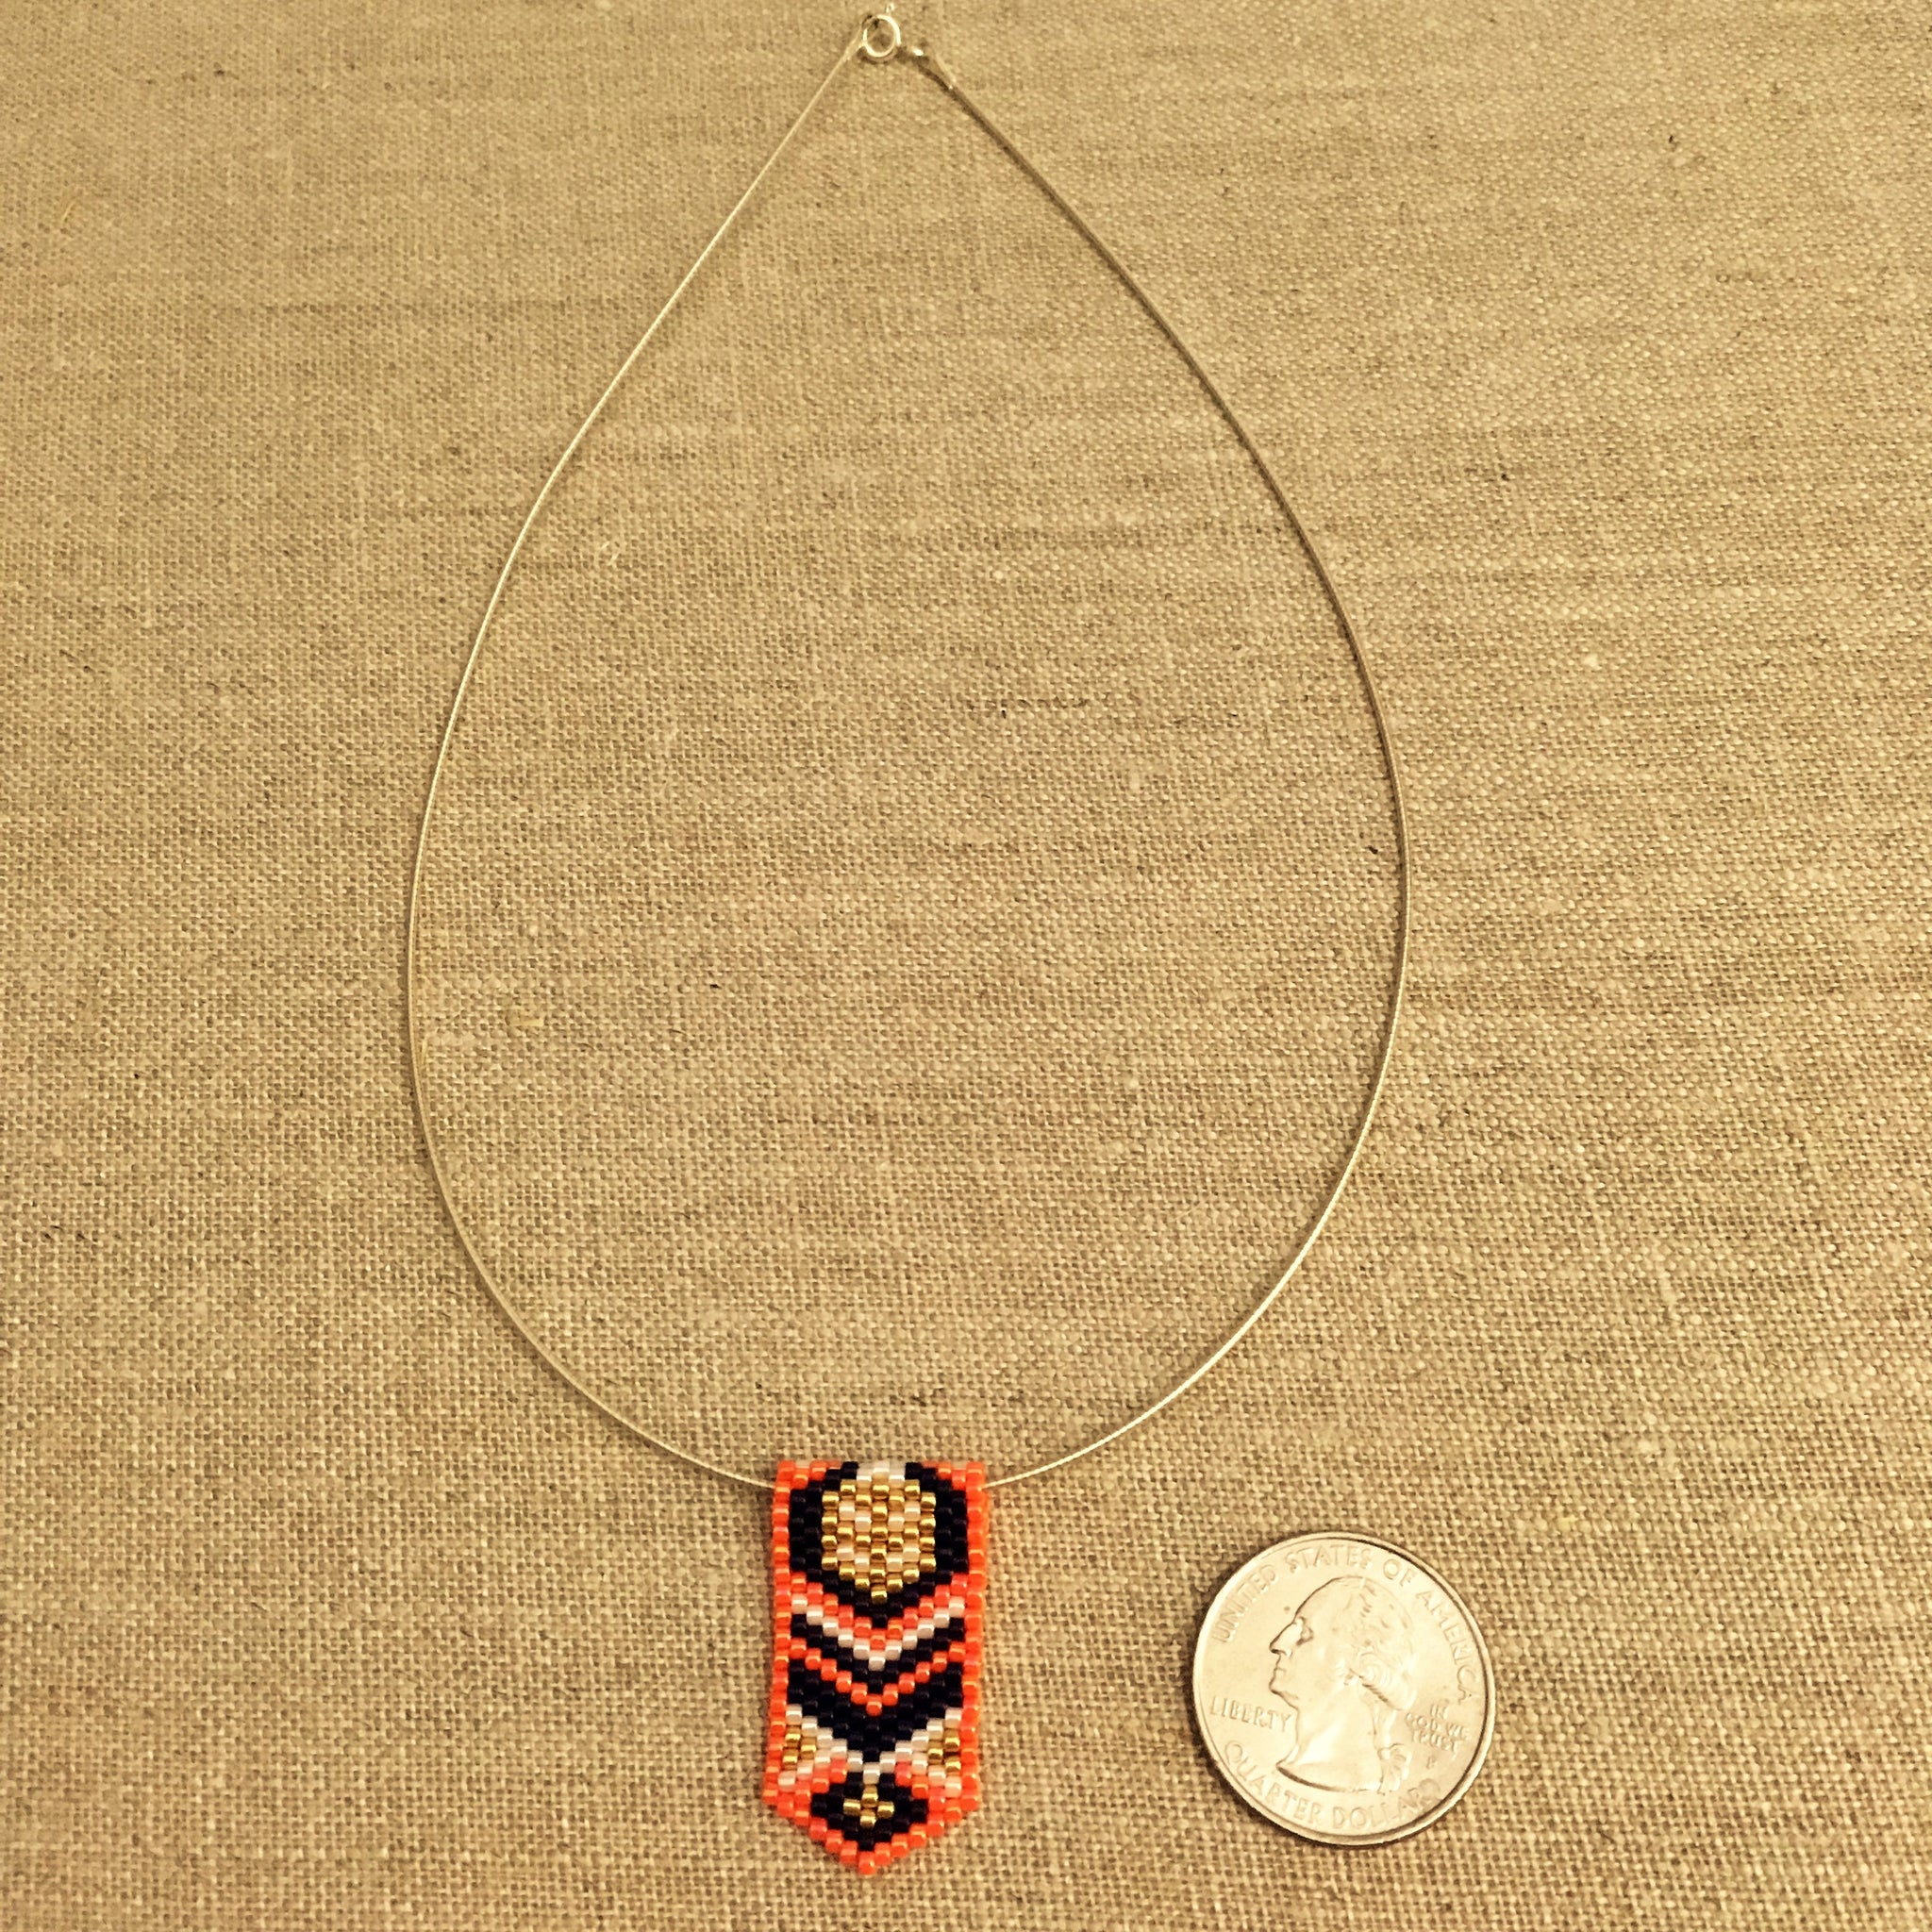 Mini Pendant Necklace in Orange, Navy Blue, White and Gold